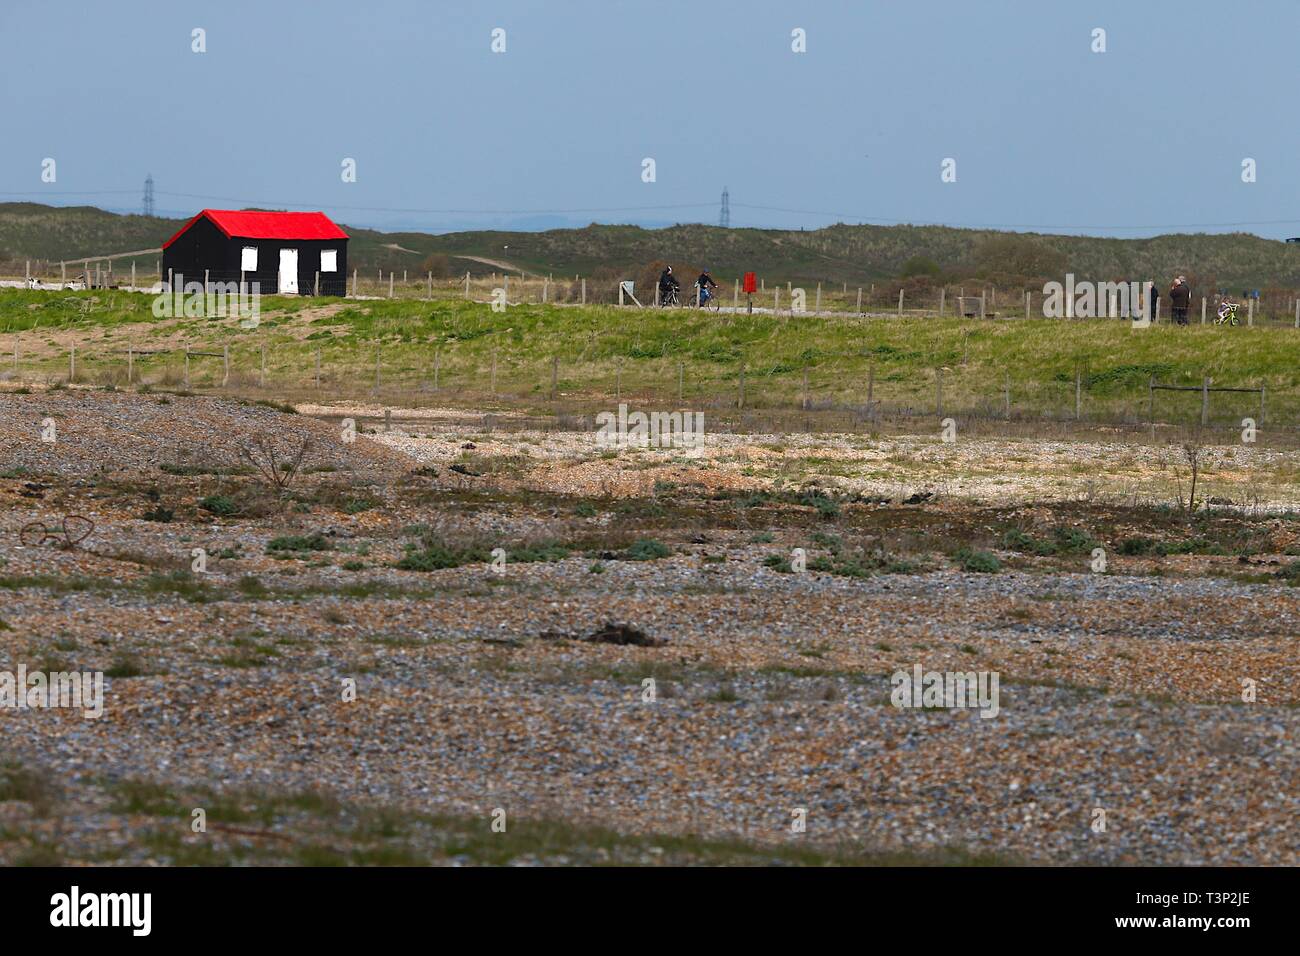 Rye, East Sussex, UK. 11th Apr, 2019. UK Weather: Cloudy intervals with blustery winds on the Rye harbour nature reserve as a few people take a walk along the many scenic routes. Credit: Paul Lawrenson 2019, Photo Credit: Paul Lawrenson/Alamy Live News Stock Photo